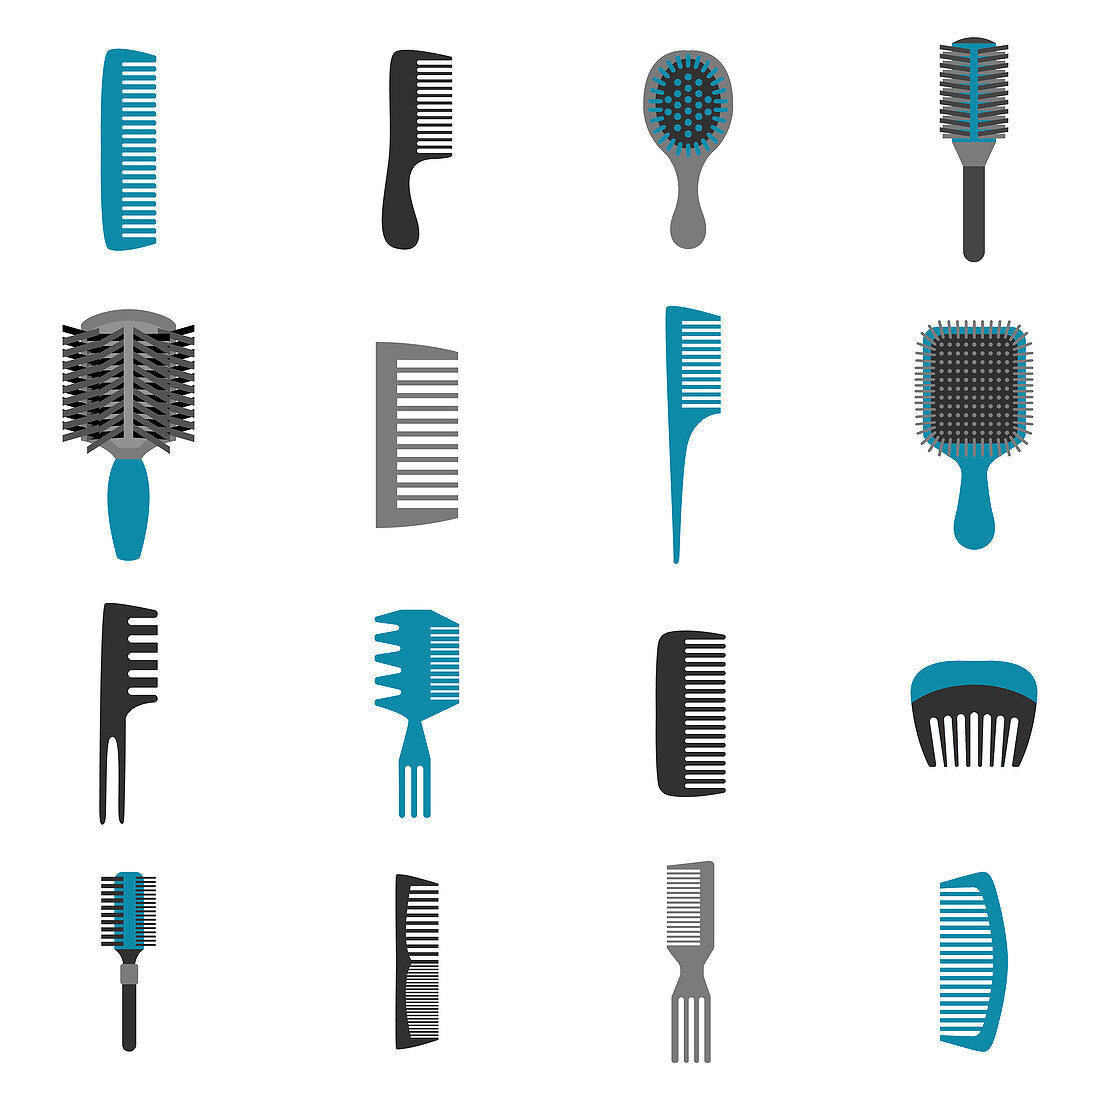 Comb and brush icons, illustration